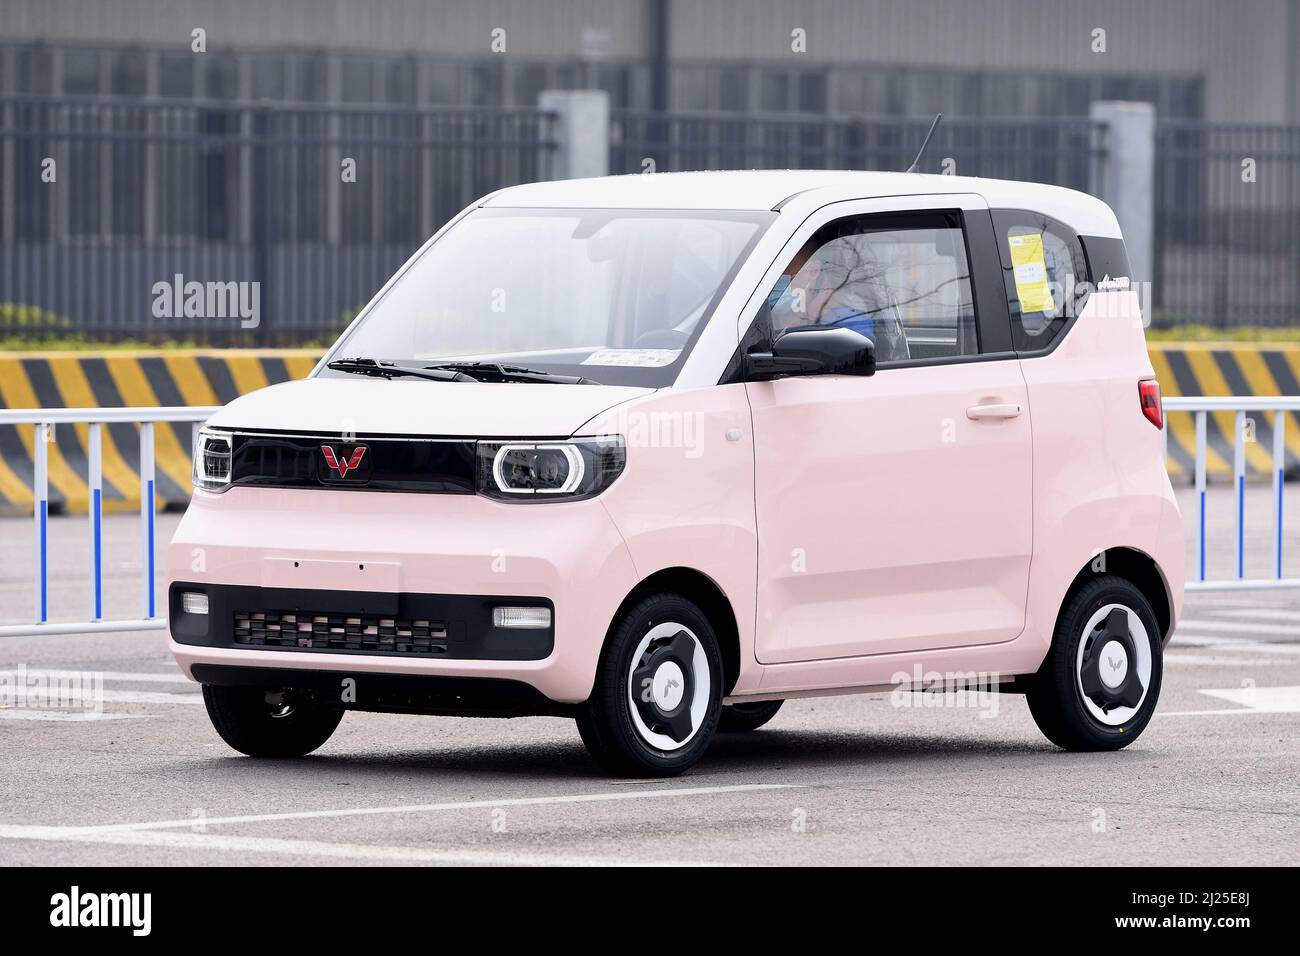 QINGDAO, CHINA - MARCH 30, 2022 - A new energy vehicle is seen at the Qingdao branch of SAIC-GM-Wuling Automobile Co., LTD in Qingdao, East China's Sh Stock Photo